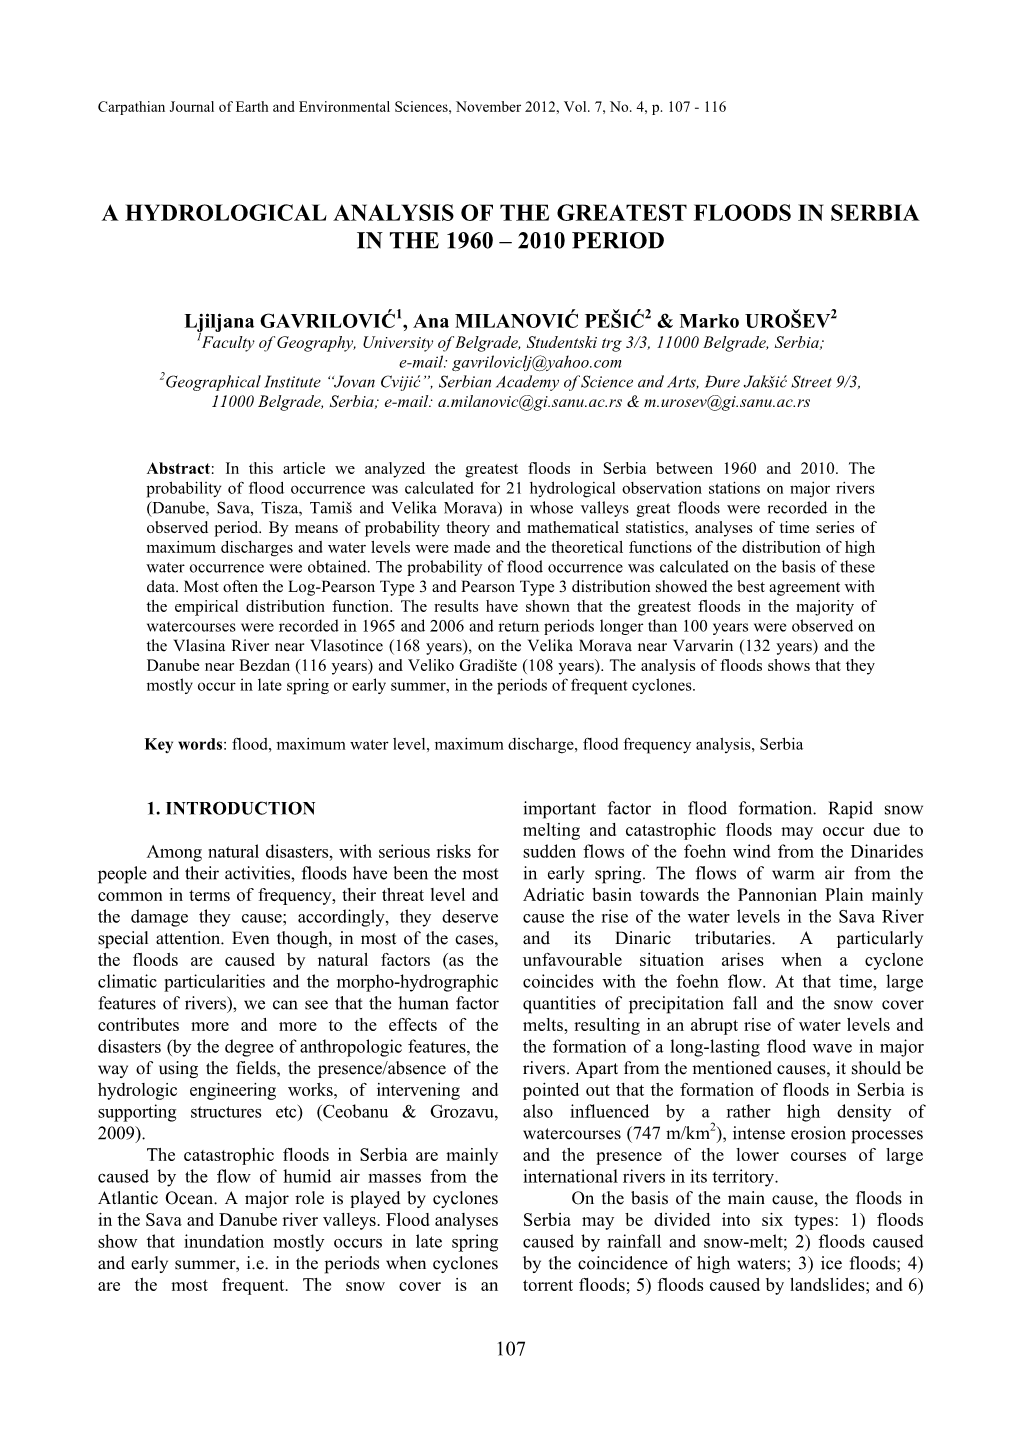 A Hydrological Analysis of the Greatest Floods in Serbia in the 1960 – 2010 Period